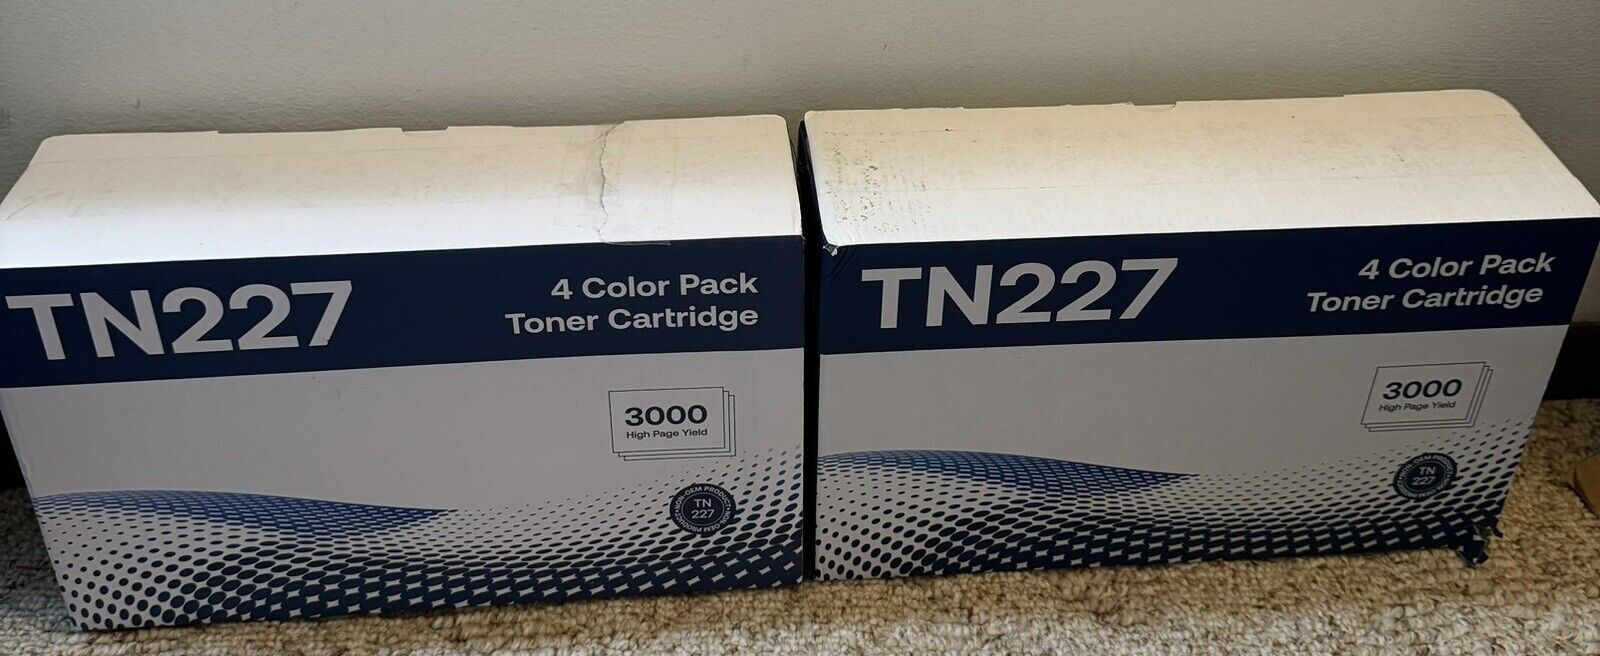 2 Pack Unbranded TN227 3000 High Yield Toner Cartridge - 4 Color Pack FAST SHIP